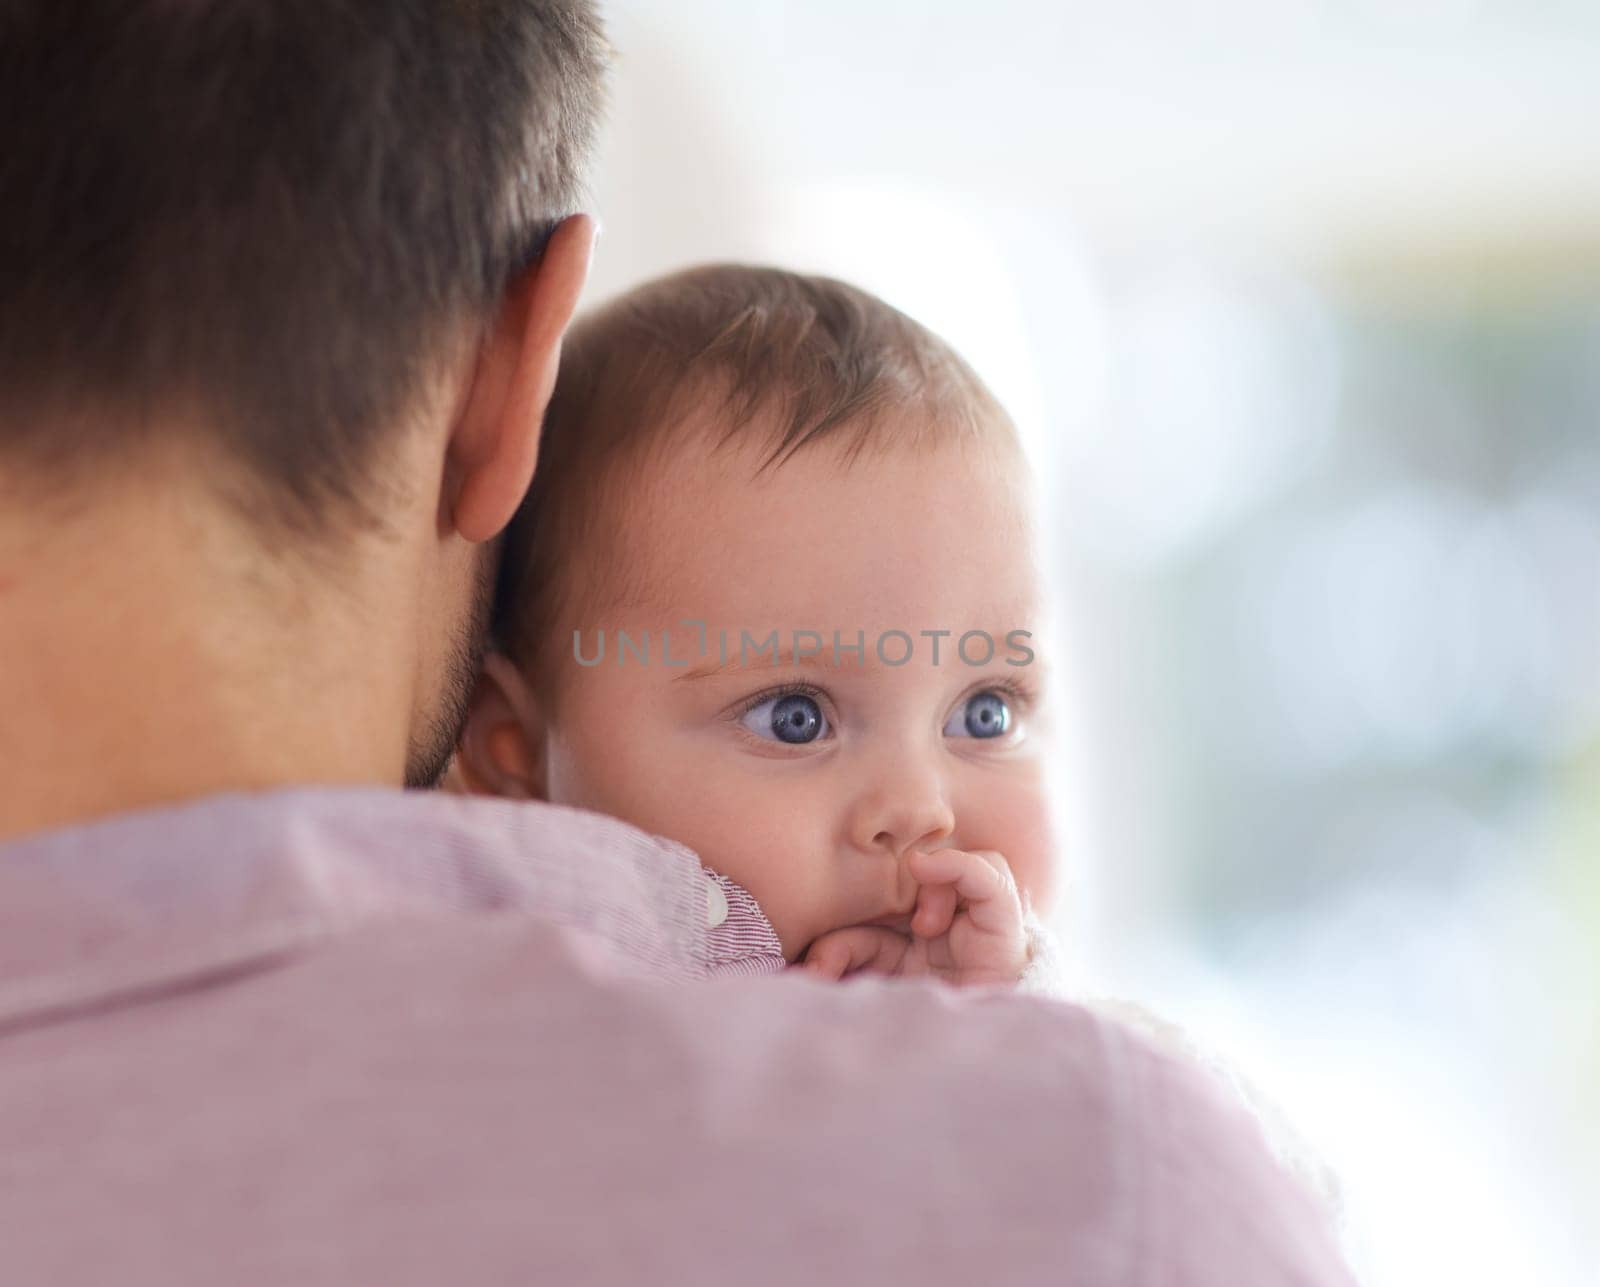 Family, baby and dad at home with love, newborn and care together with parent and bonding. Relax, father and happy in a house with hug of a calm infant with childcare and smile with support and back.